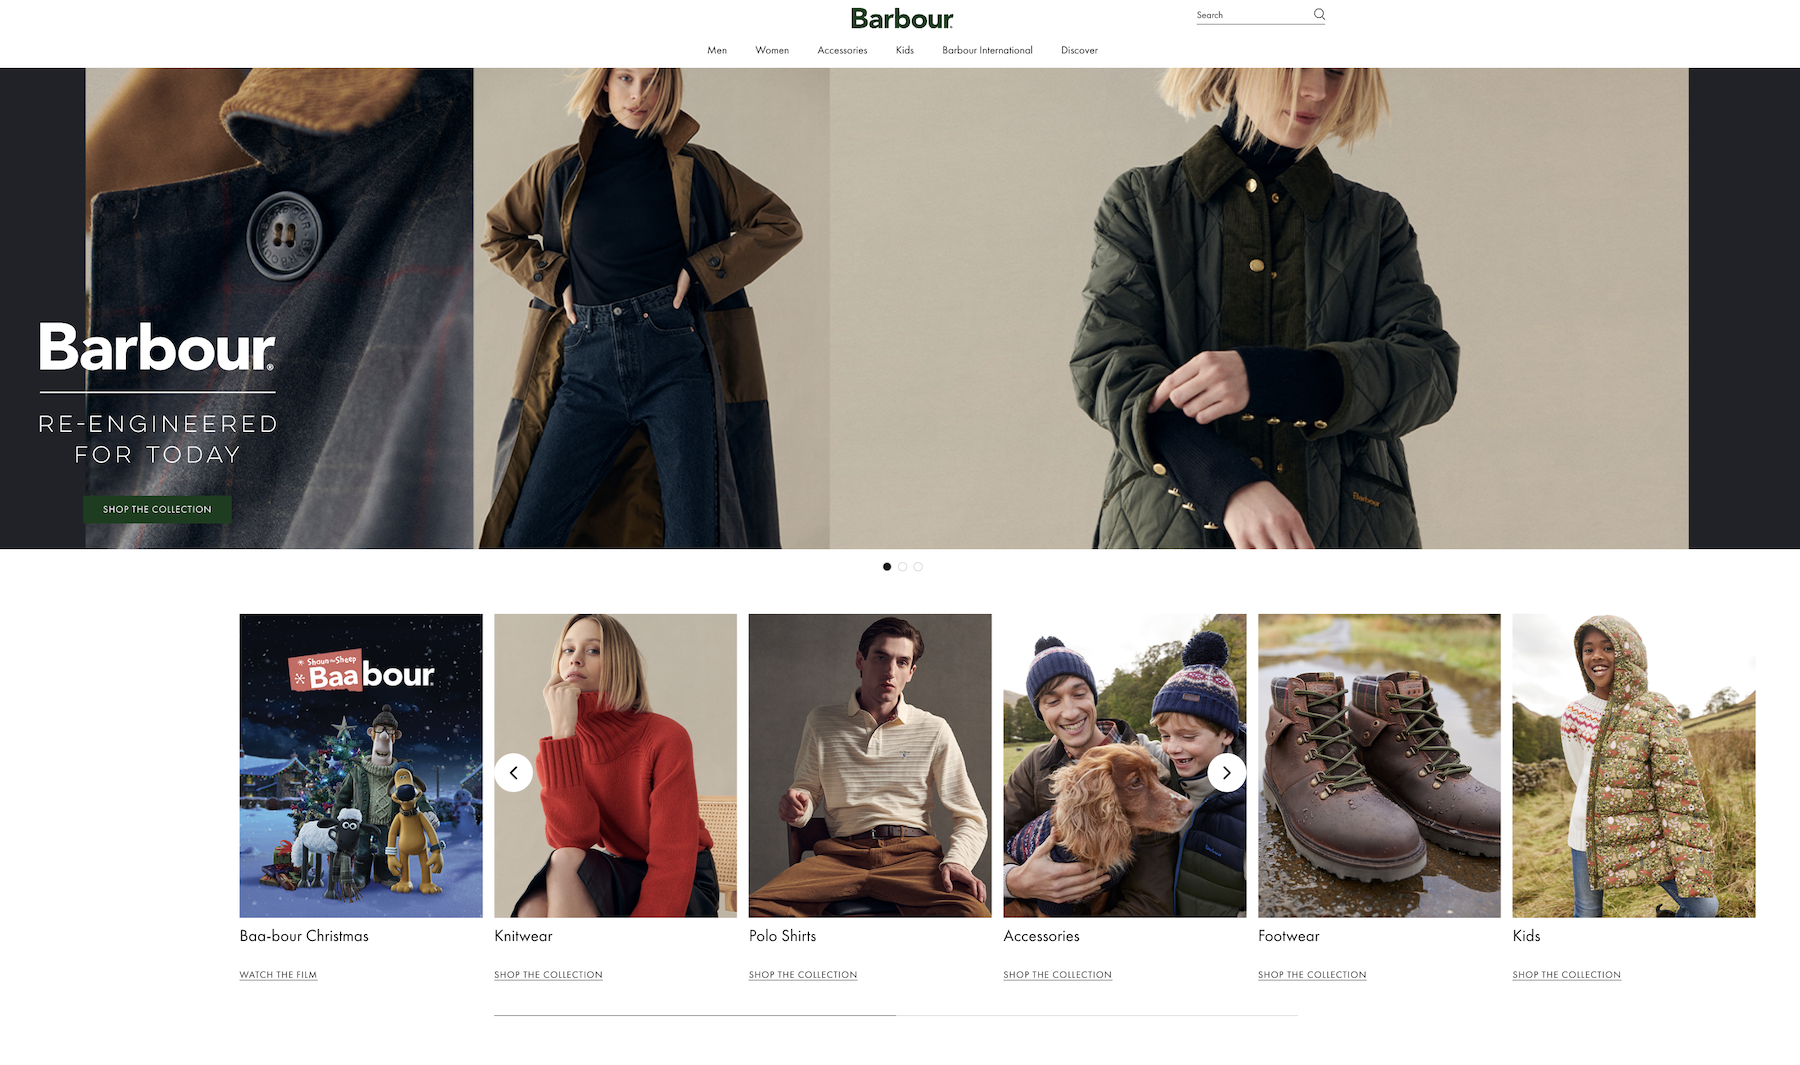 The Barbour store features a minimalist layout, user-friendly navigation, and educational content.